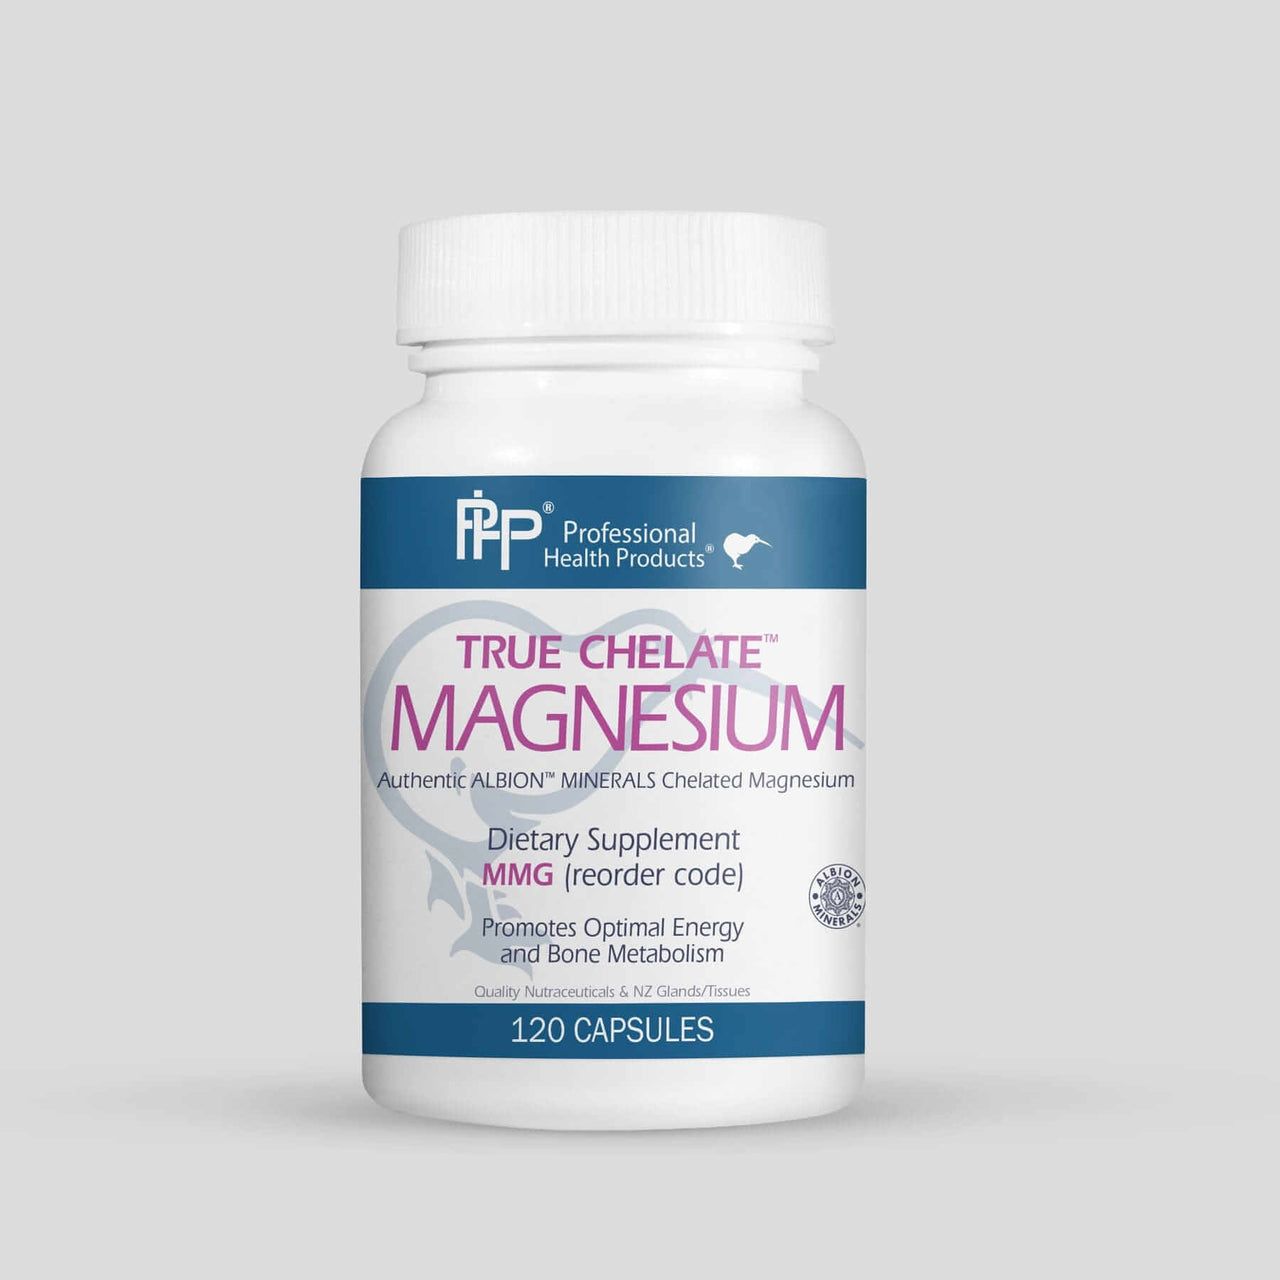 True Chelate Magnesium * Prof Health Products Supplement - Conners Clinic